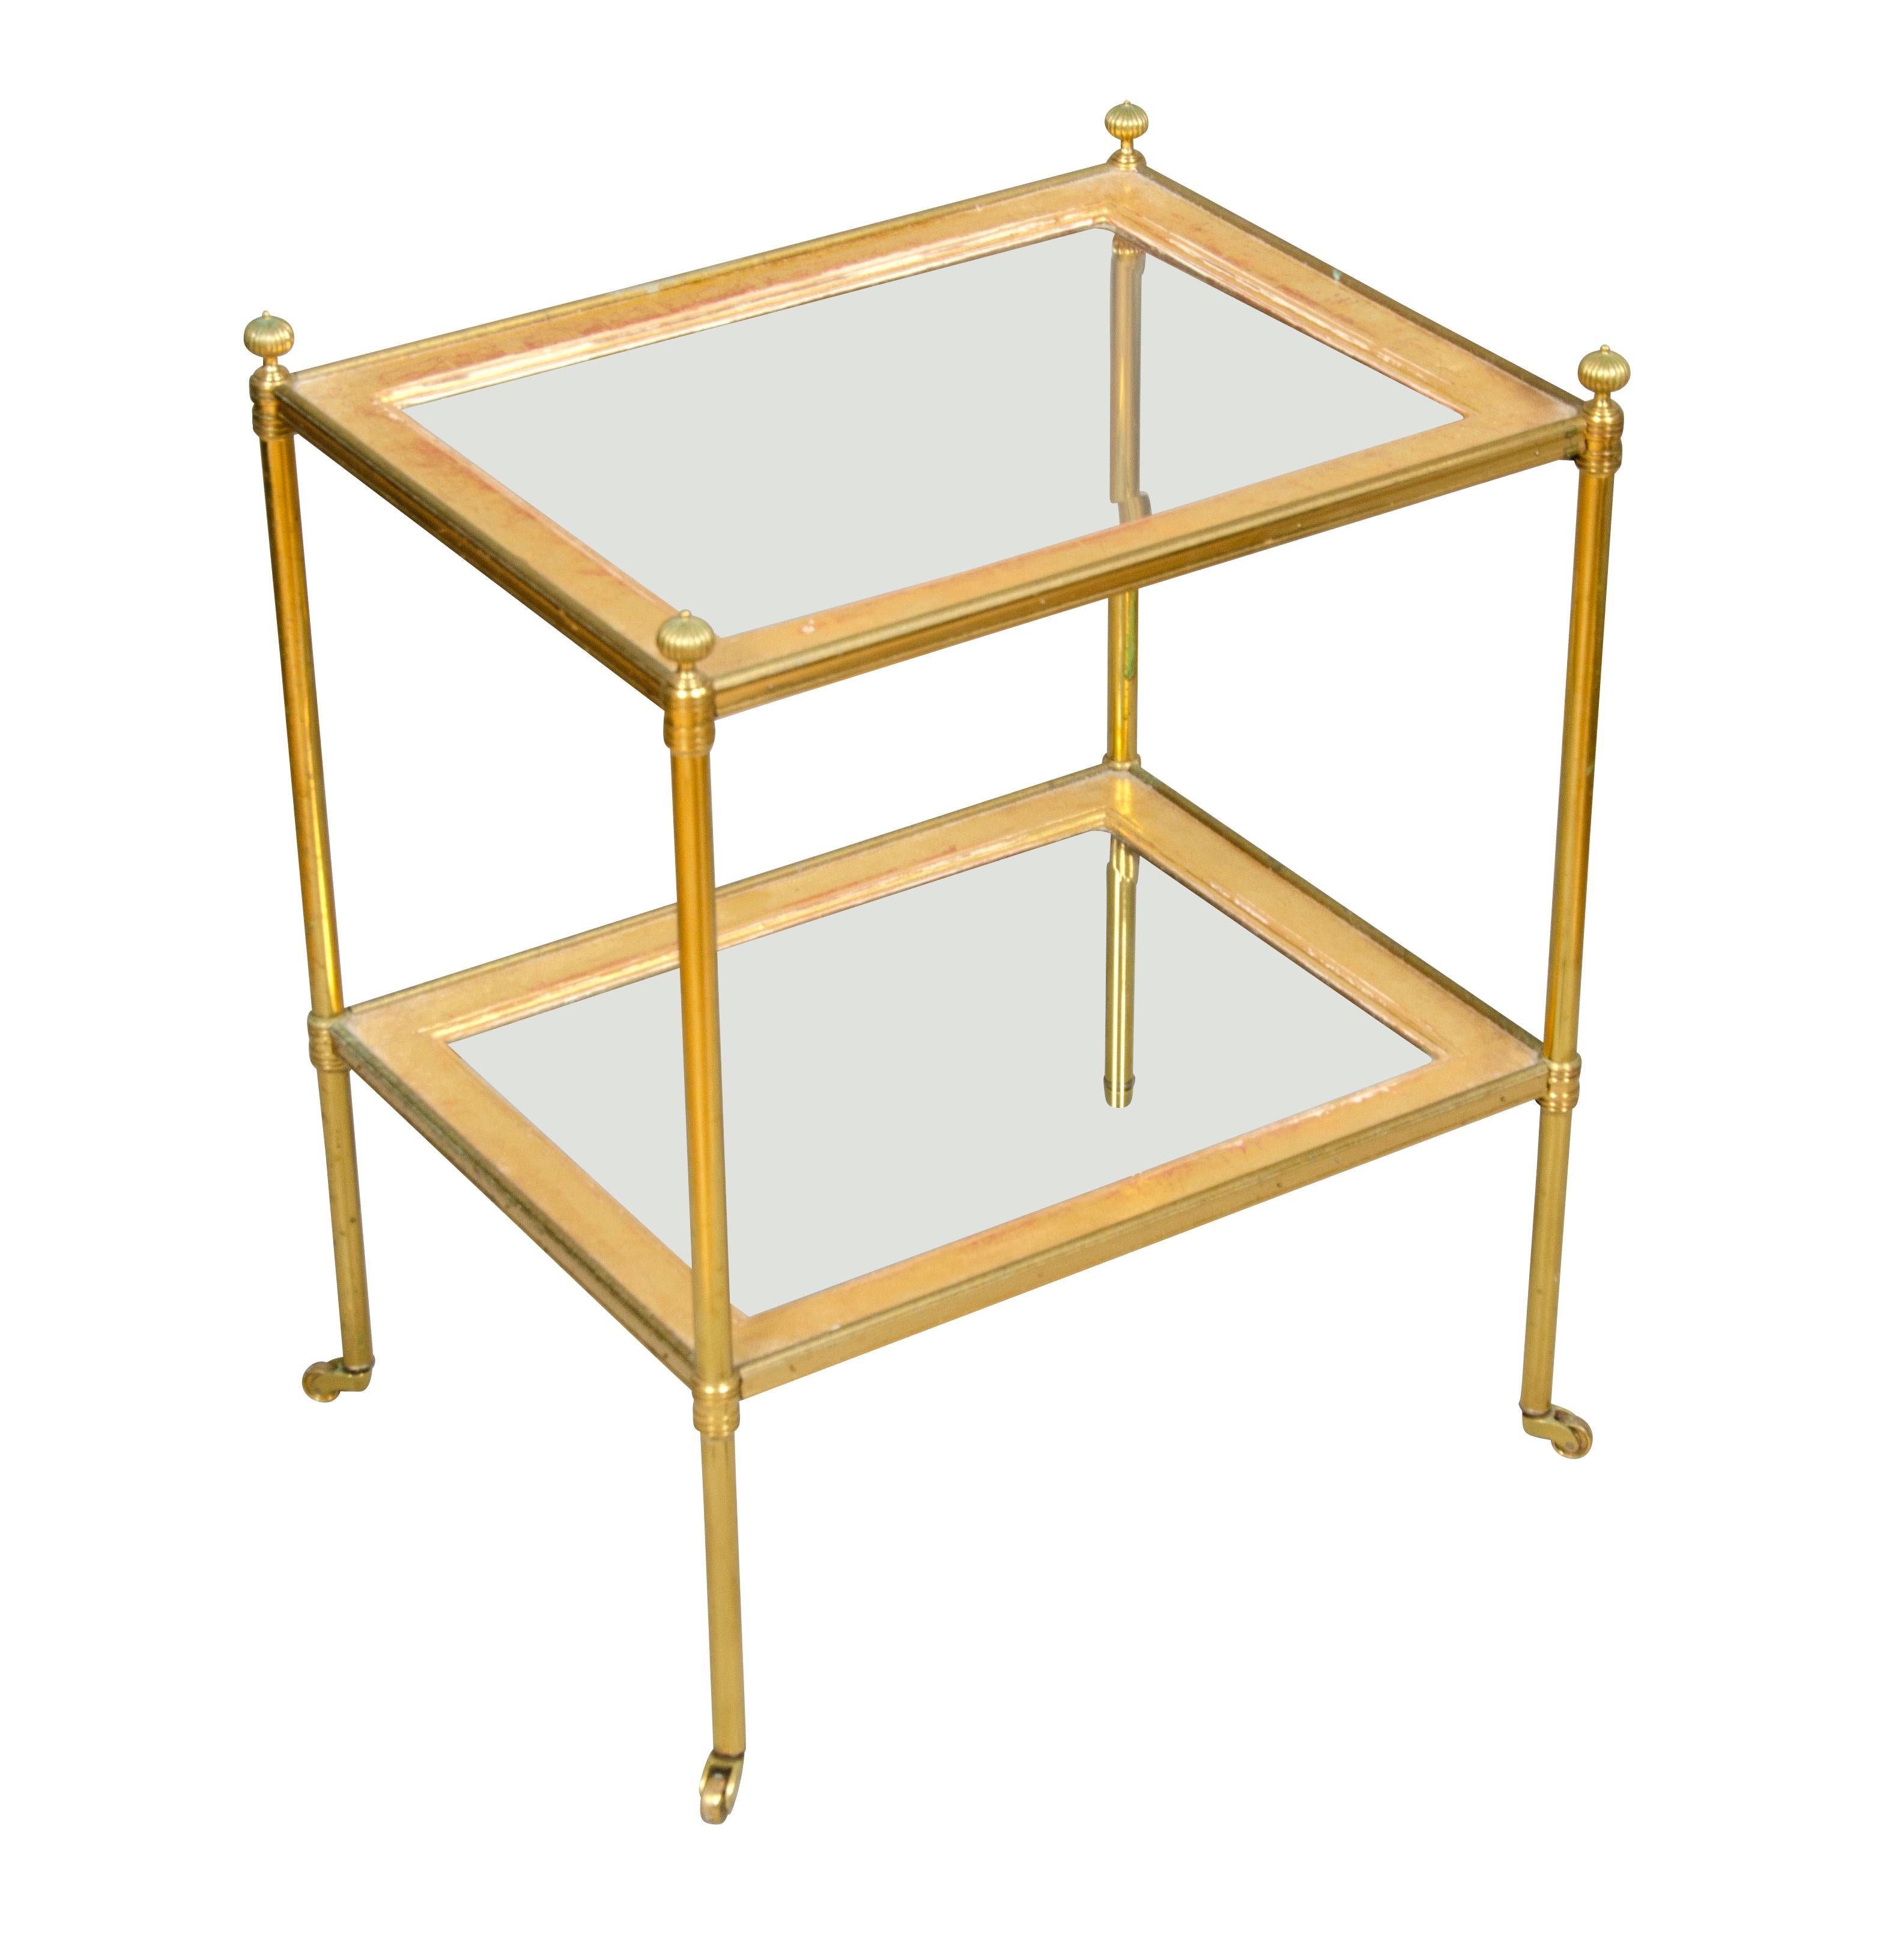 Gilt Edwardian Style Brass and Glass Table